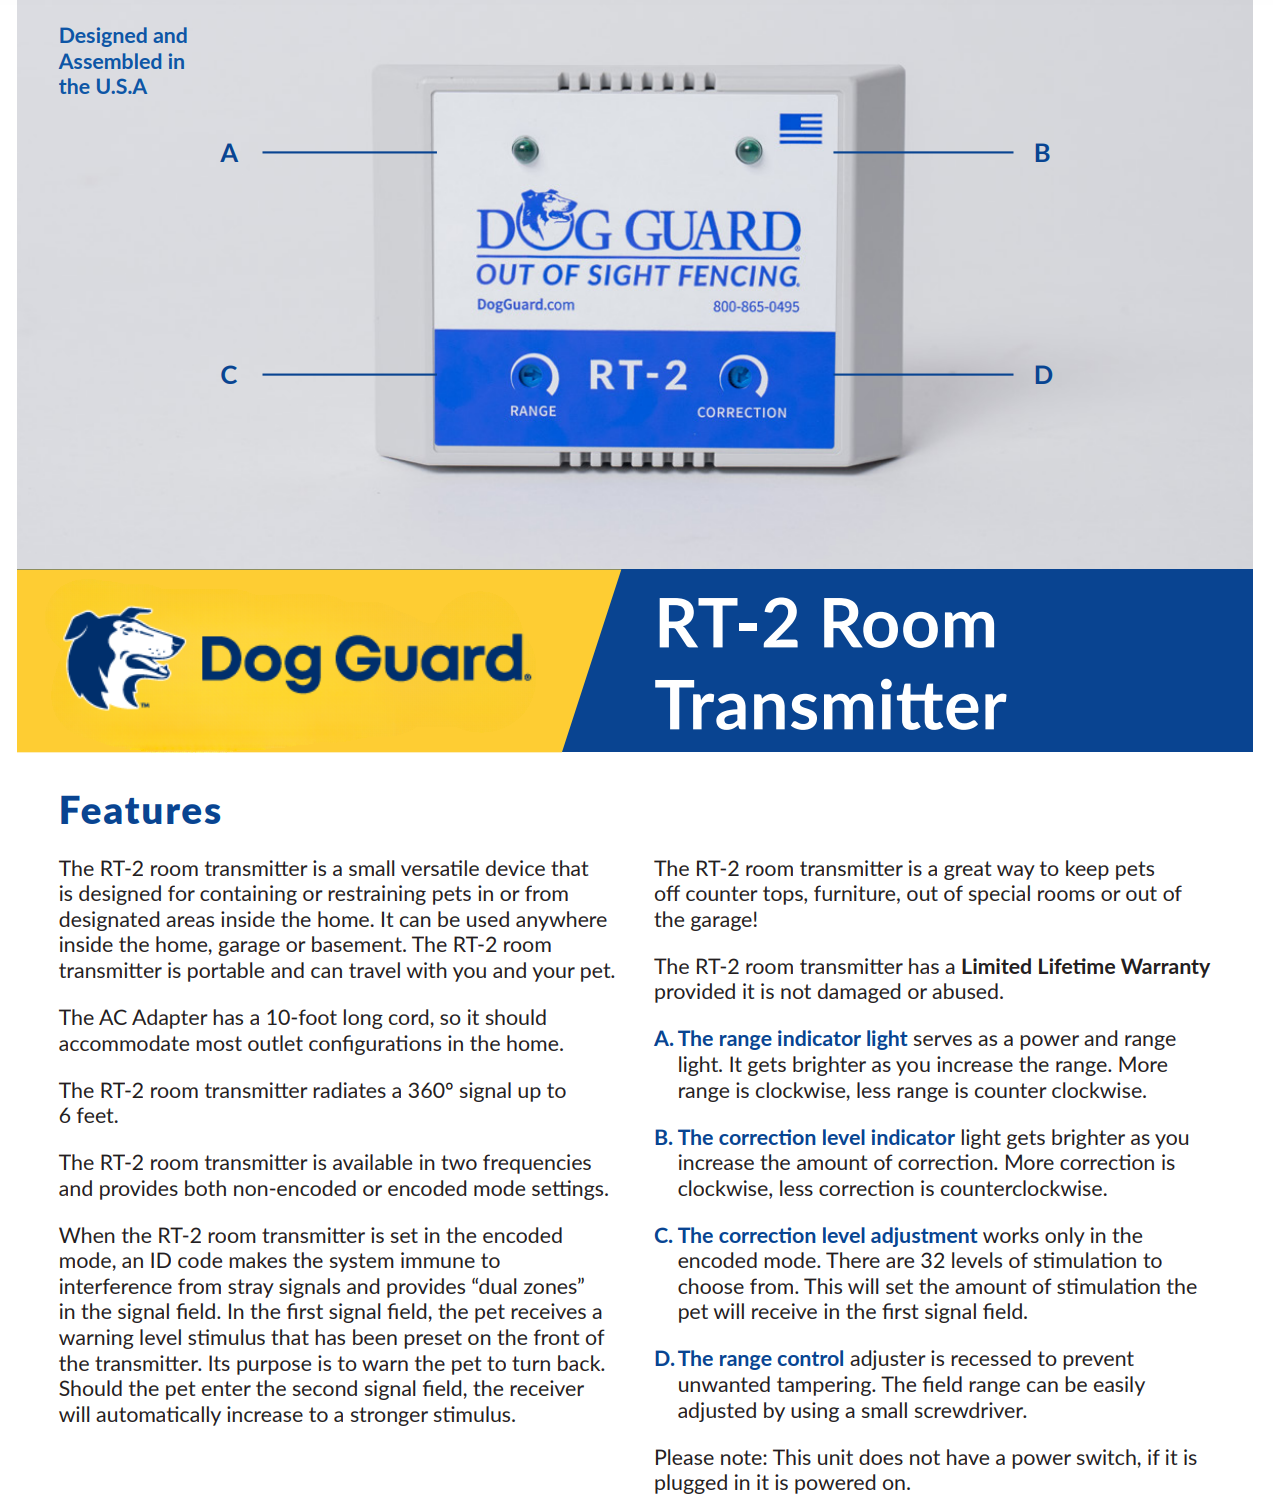 Room Transmitter RT-2 (Indoor Pet Containment or Avoid Area Solutions)